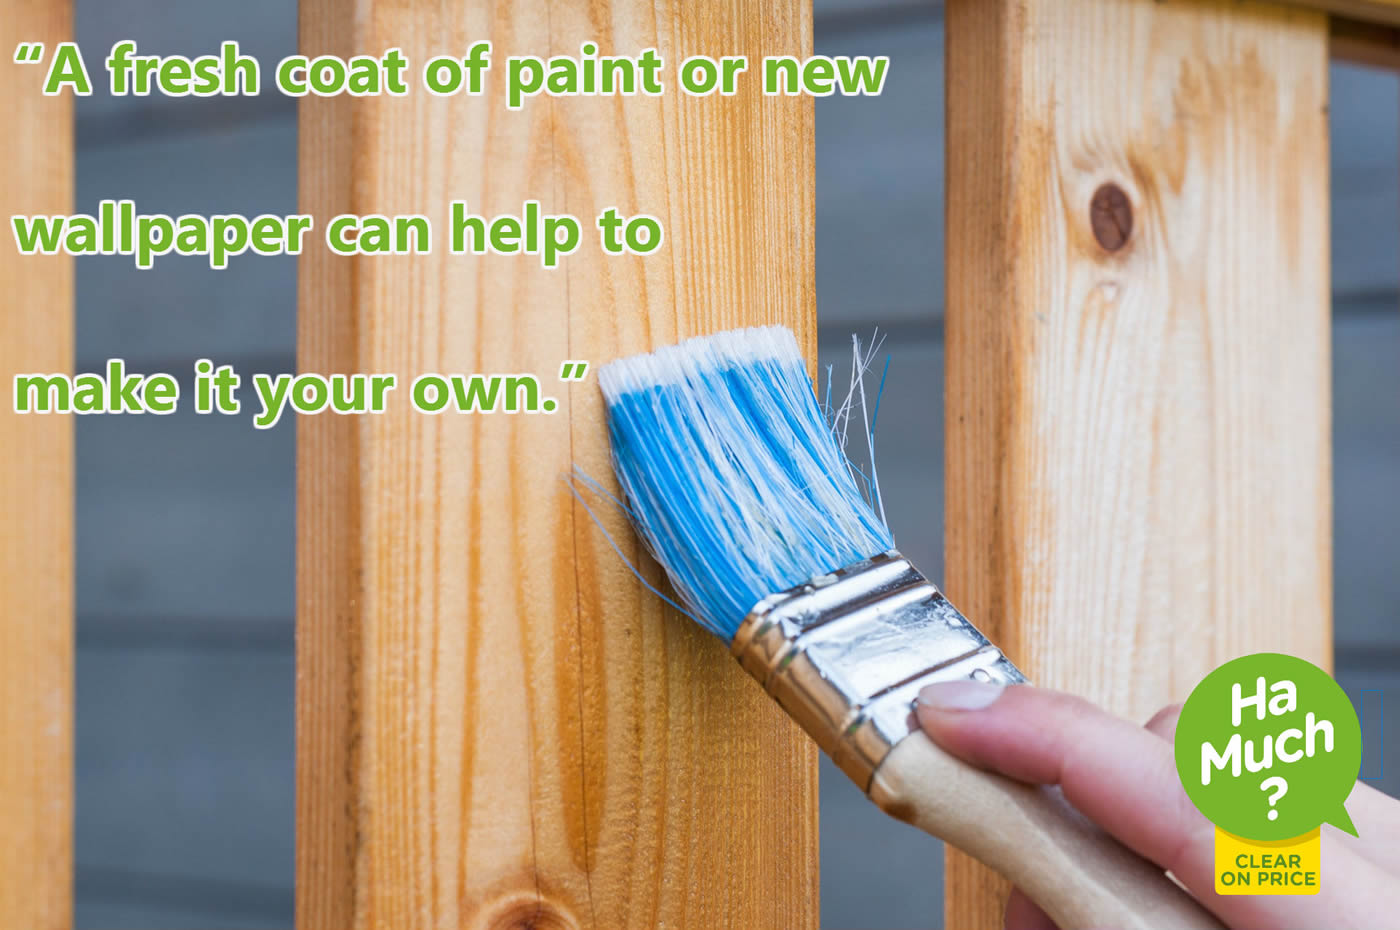 A fresh coat of paint or new wallpaper can help to make it your own